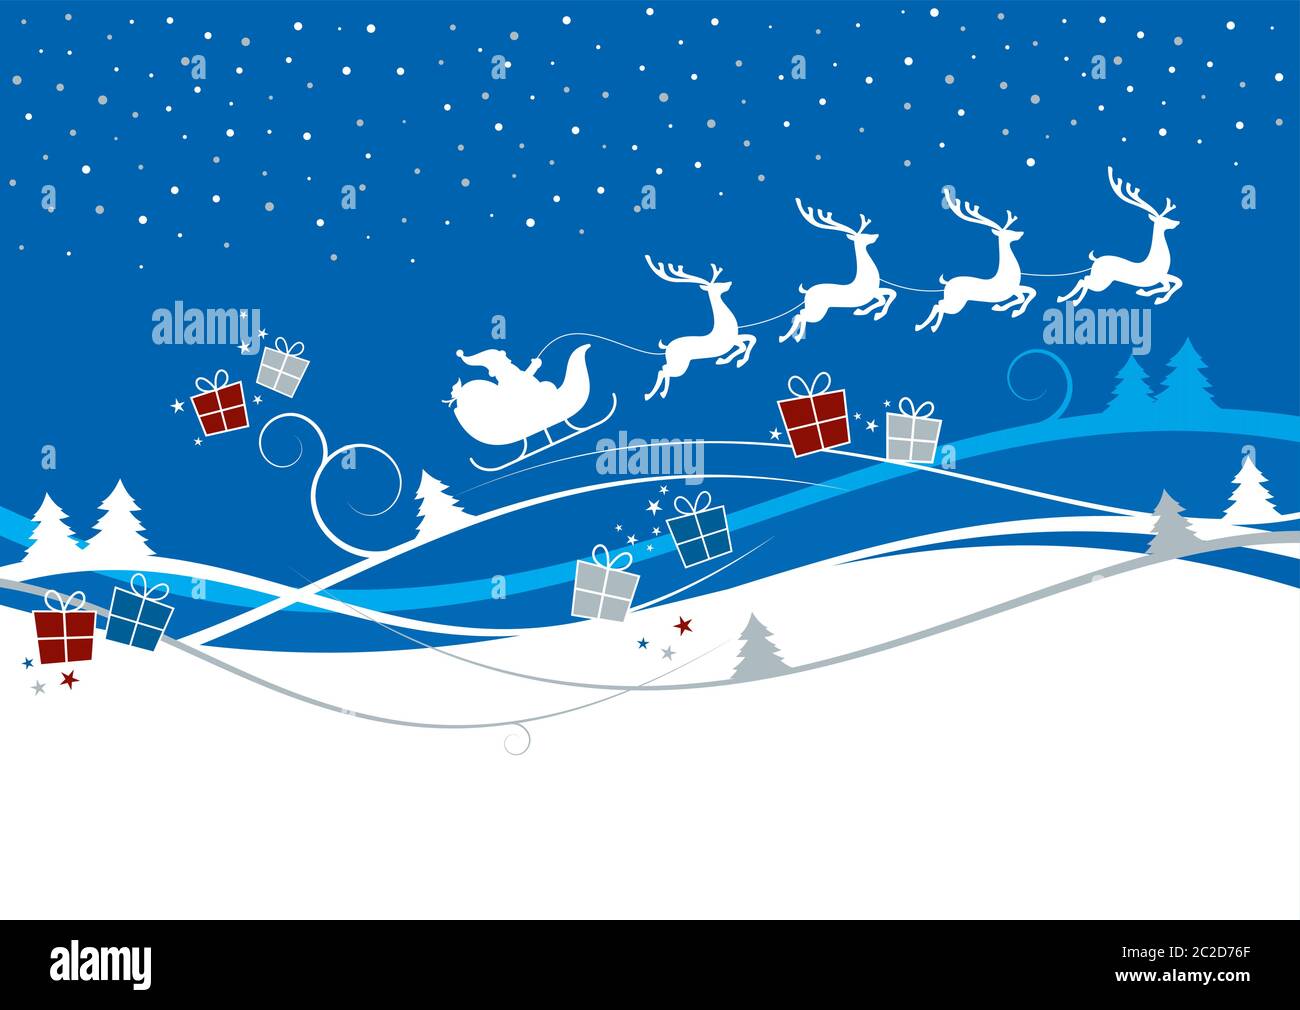 Christmas background with Santa sleigh, reindeer and gift boxes. Stock Vector